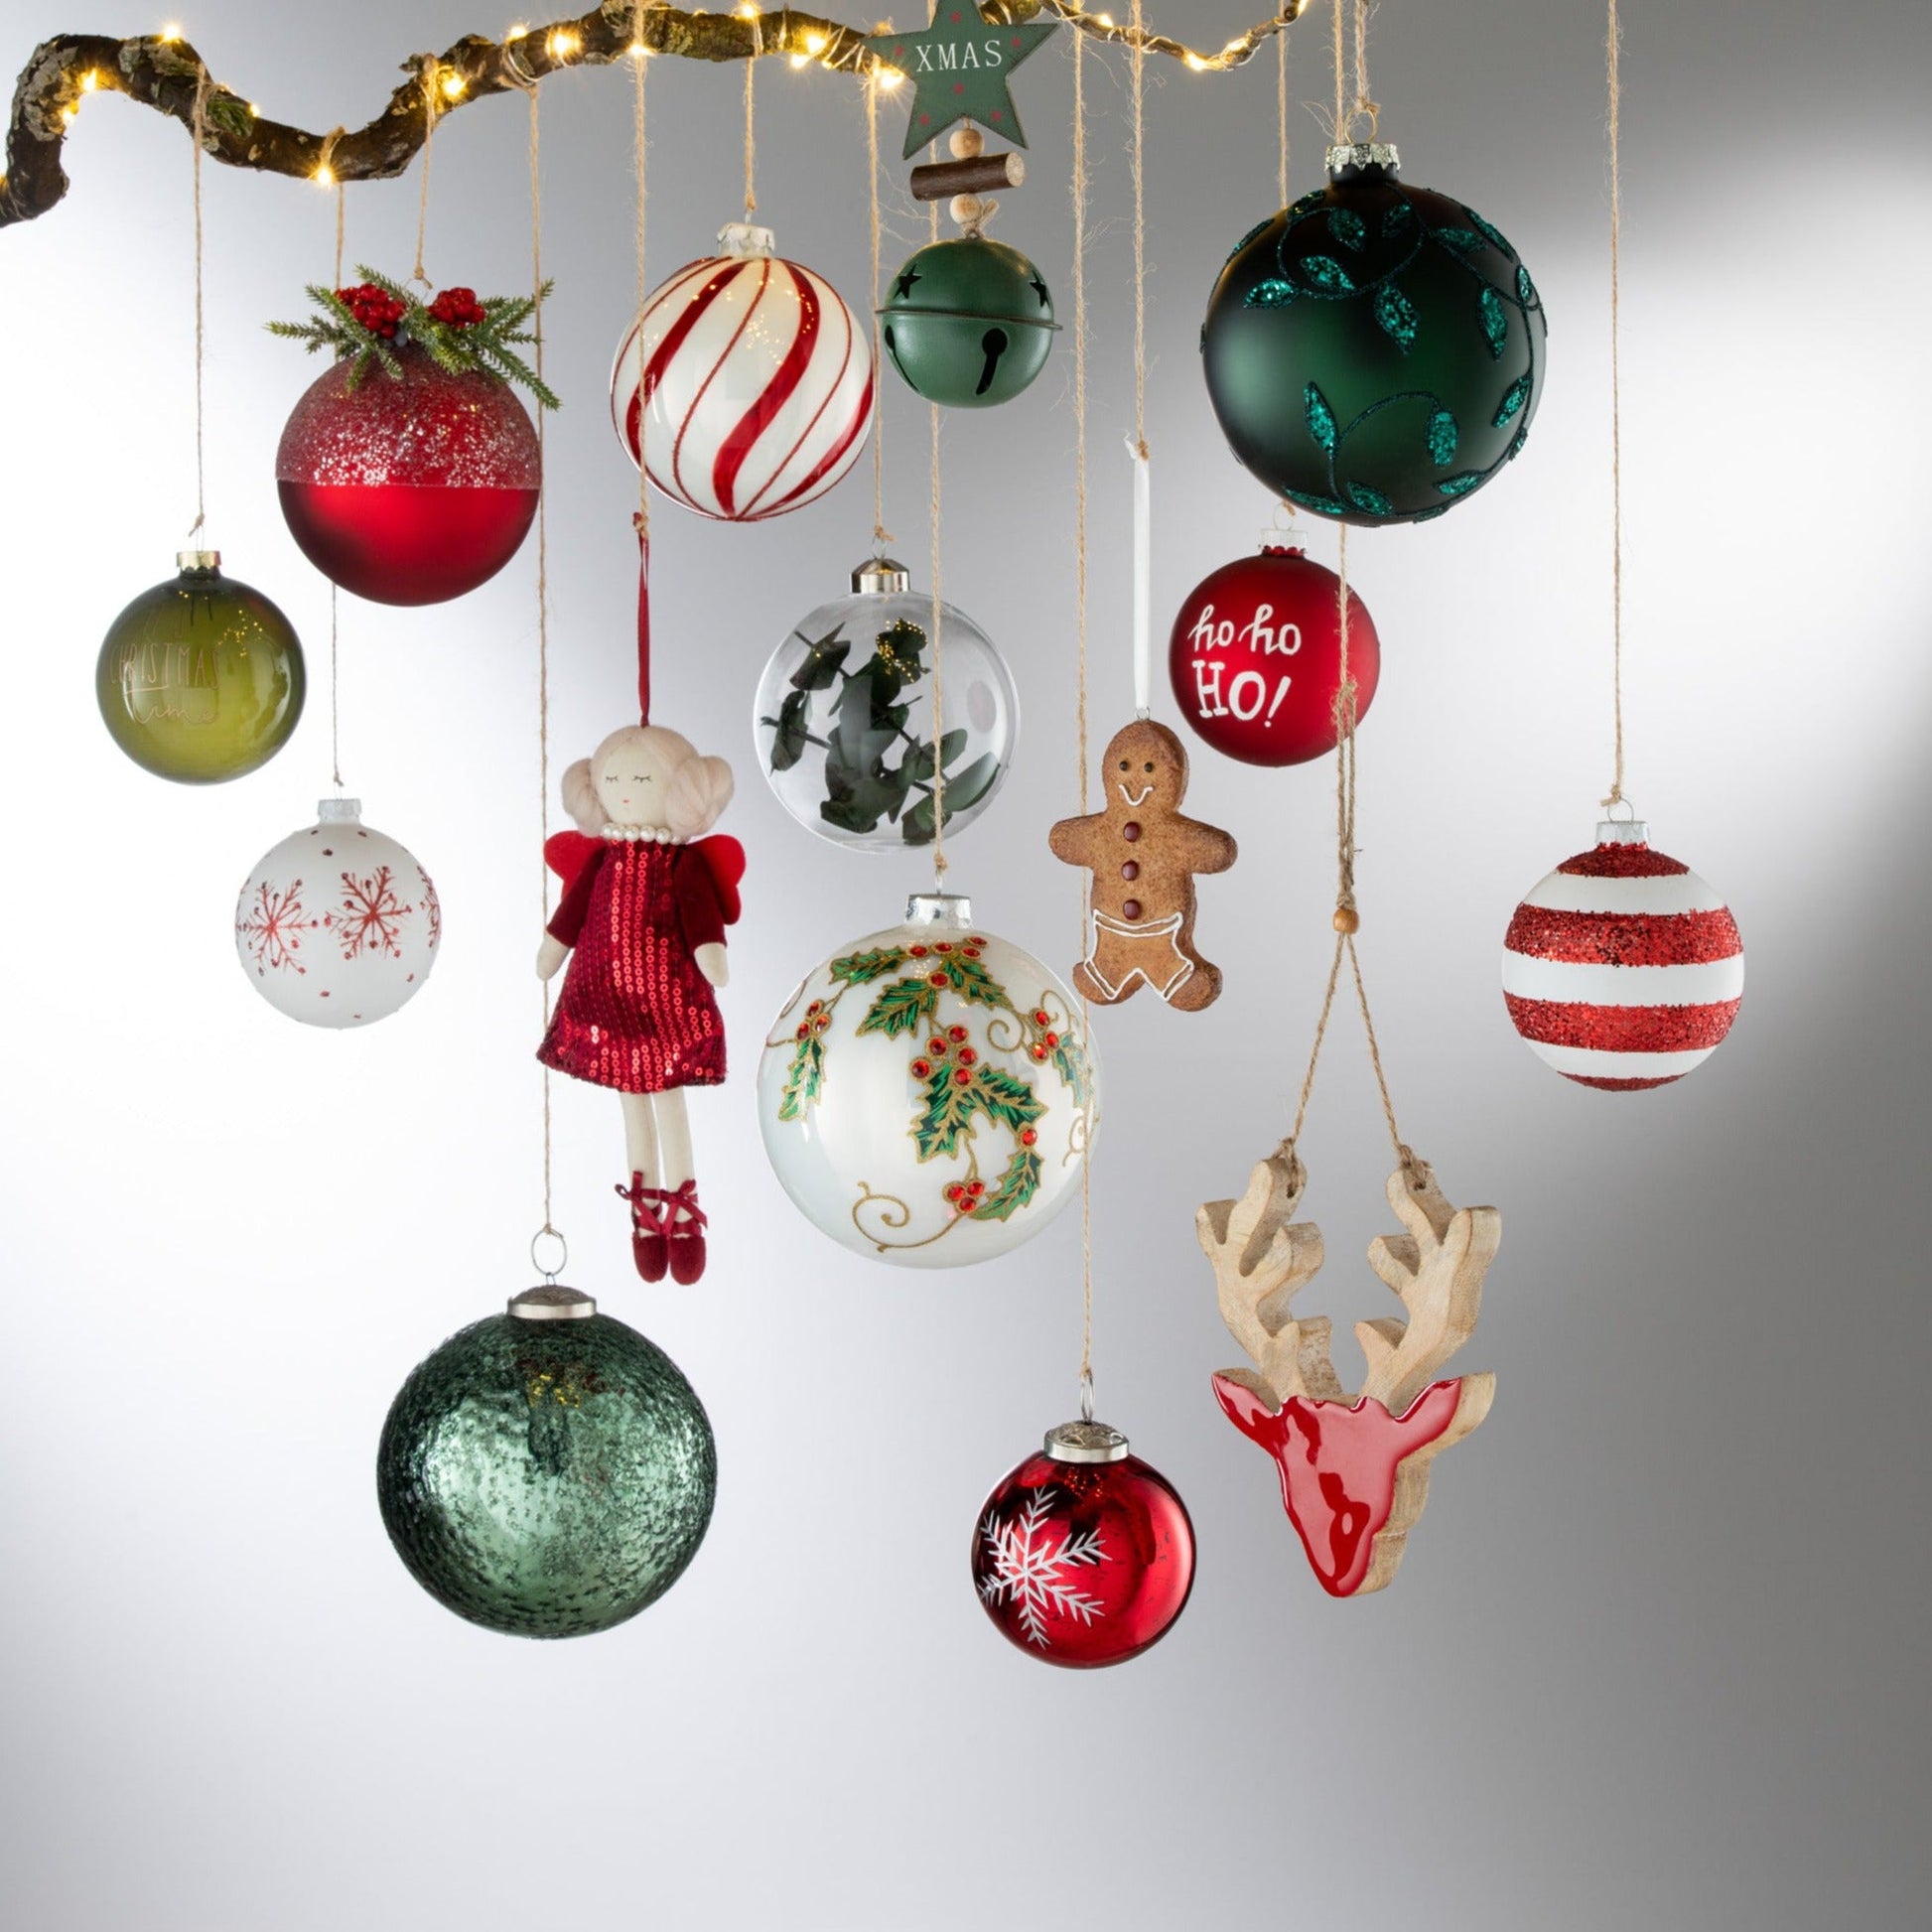 Red Glass Christmas Baubles Set (x6)